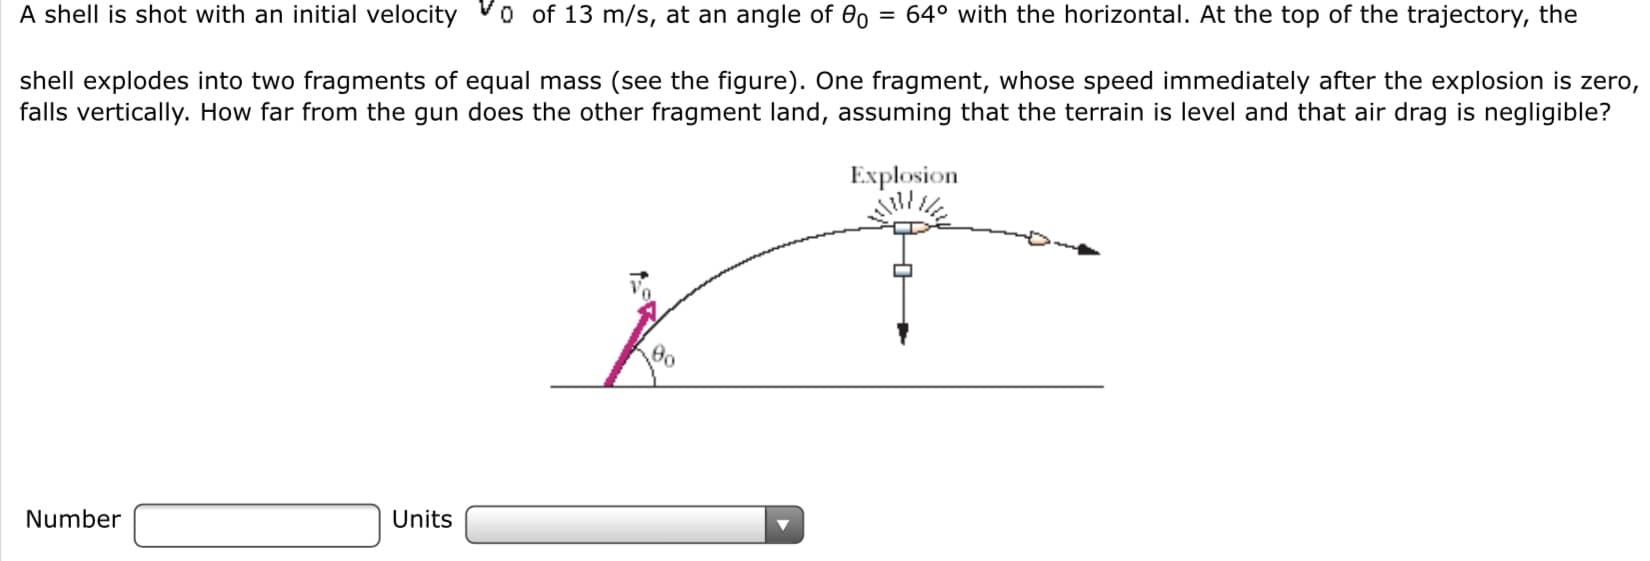 A shell is shot with an initial velocity
o of 13 m/s, at an angle of 0o
= 64° with the horizontal. At the top of the trajectory, the
shell explodes into two fragments of equal mass (see the figure). One fragment, whose speed immediately after the explosion is zero,
falls vertically. How far from the gun does the other fragment land, assuming that the terrain is level and that air drag is negligible?
Explosion
Number
Units
